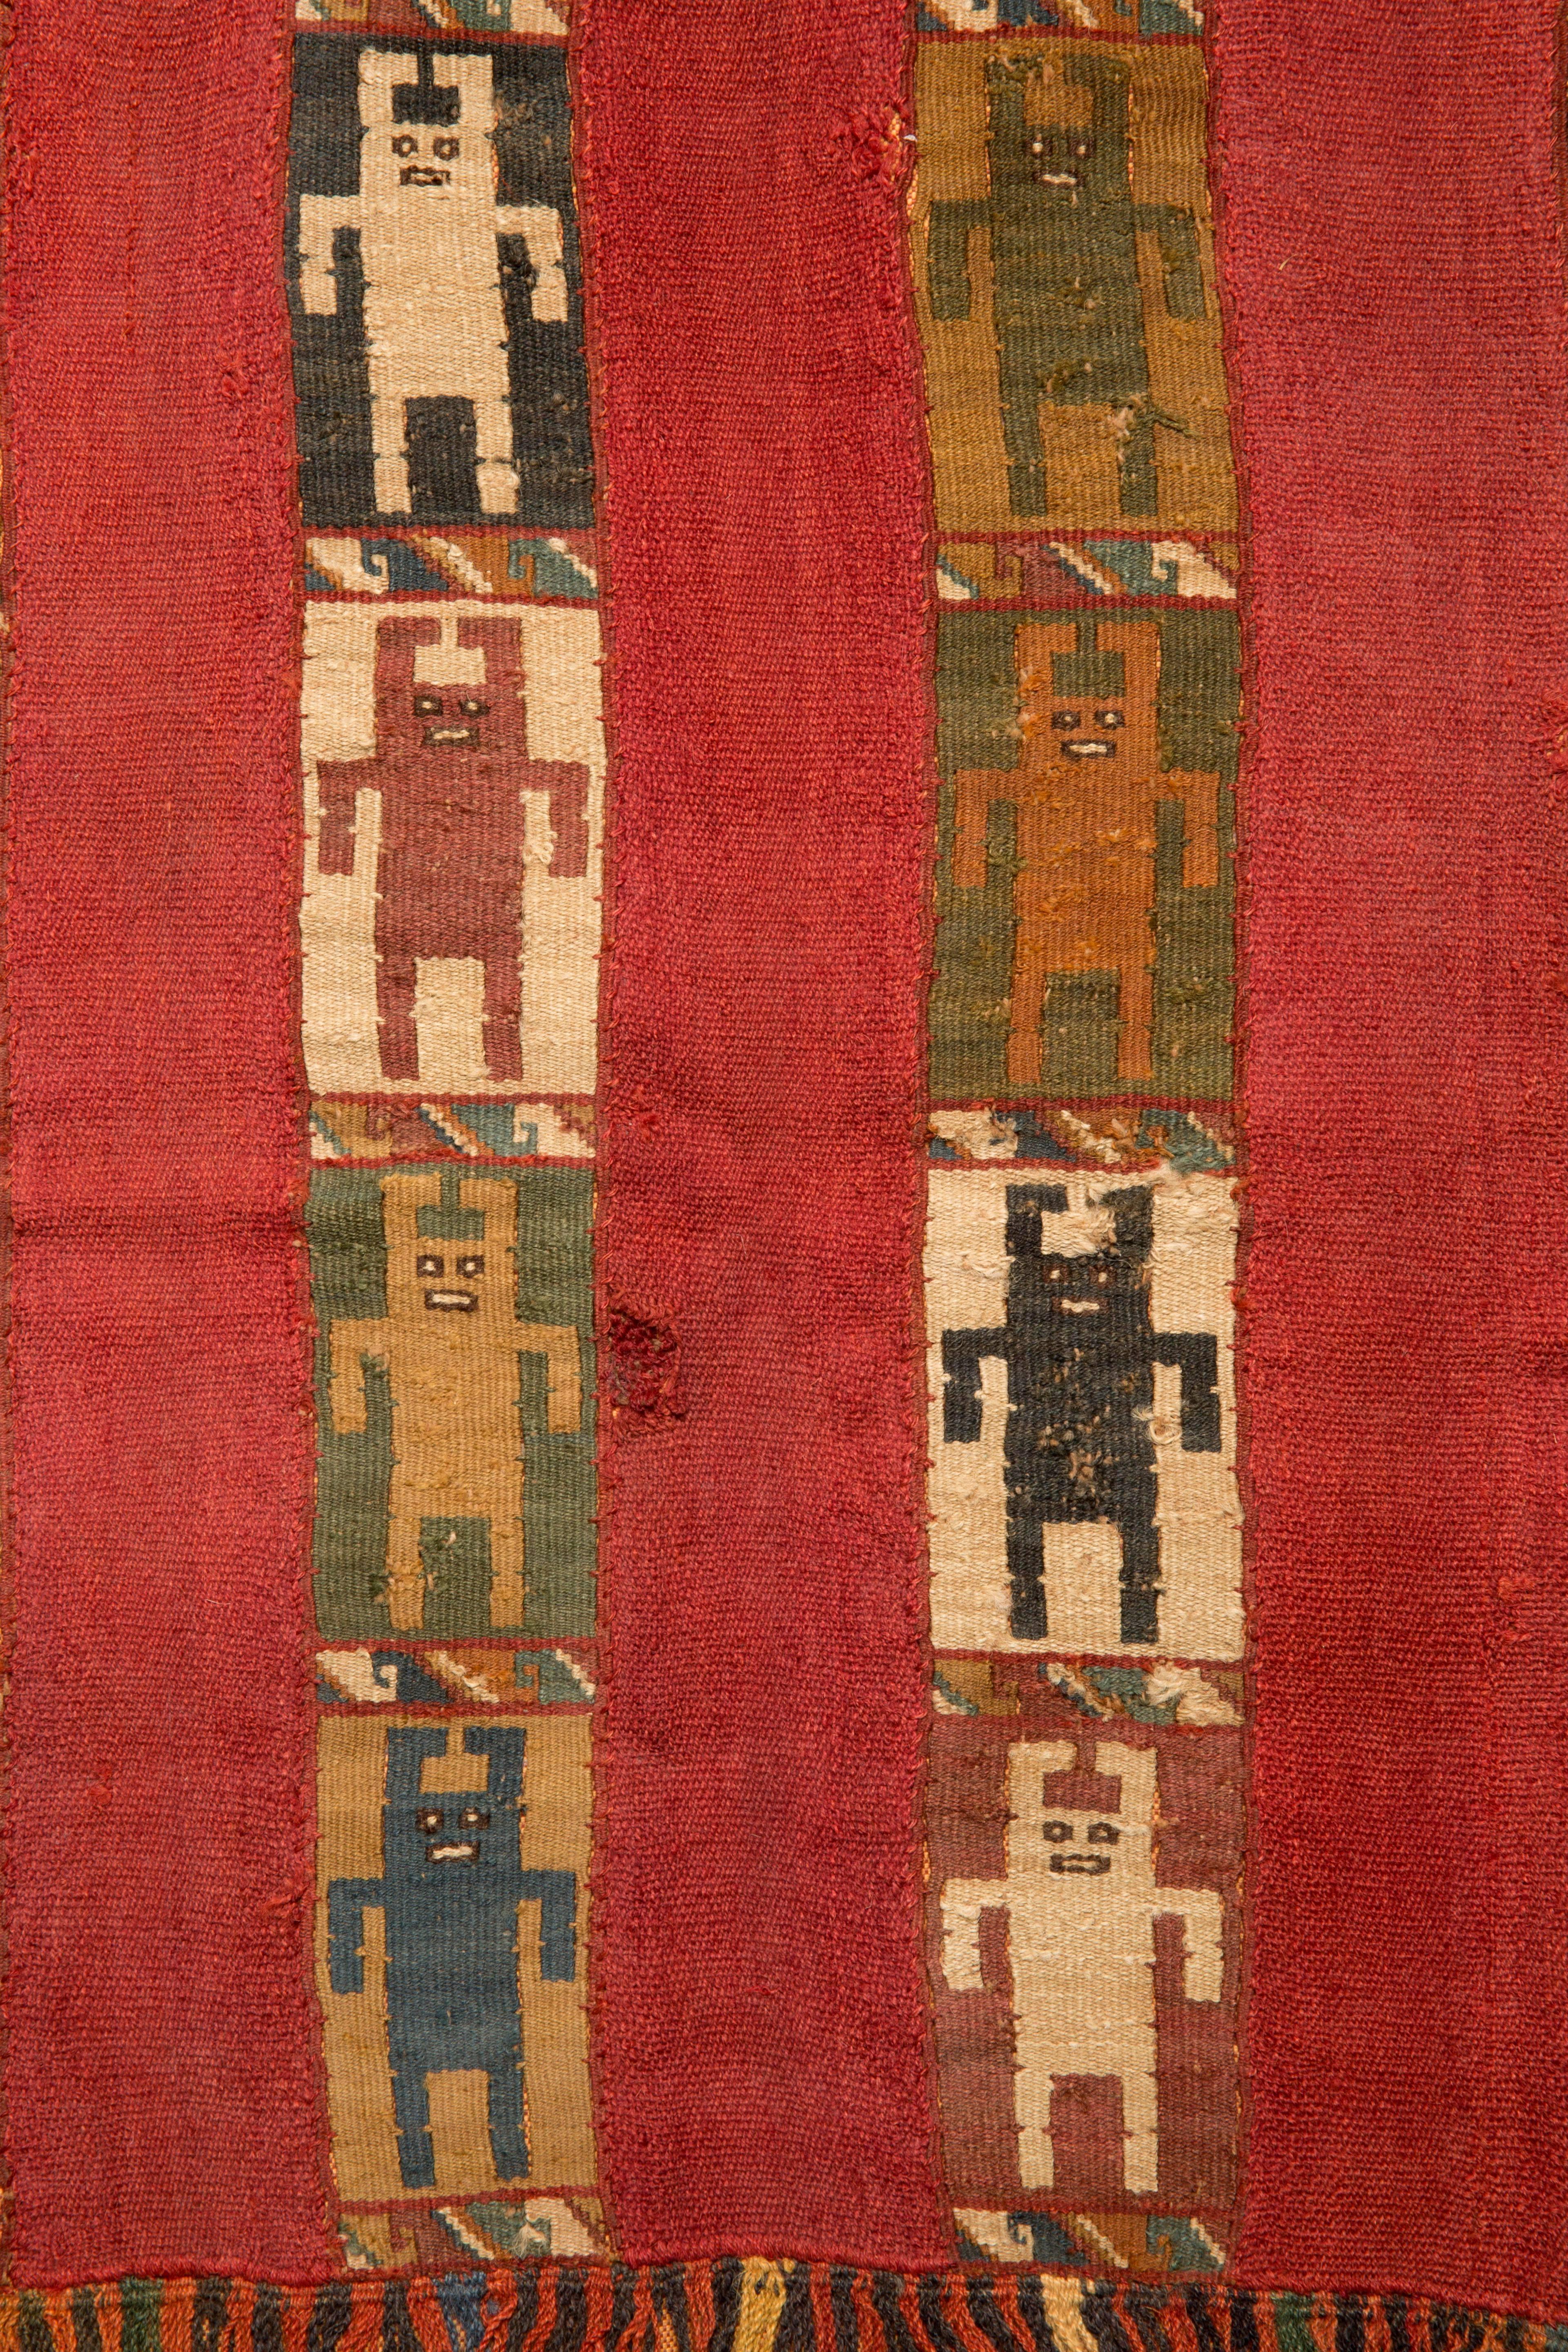 Inca Mantle with 16 figures in cubist form with multi-color fringes.
This pieces with a Certificat de Bien Culturel from France. 

For the Incas finely worked and highly decorative textiles came to symbolize both wealth and status, fine cloth